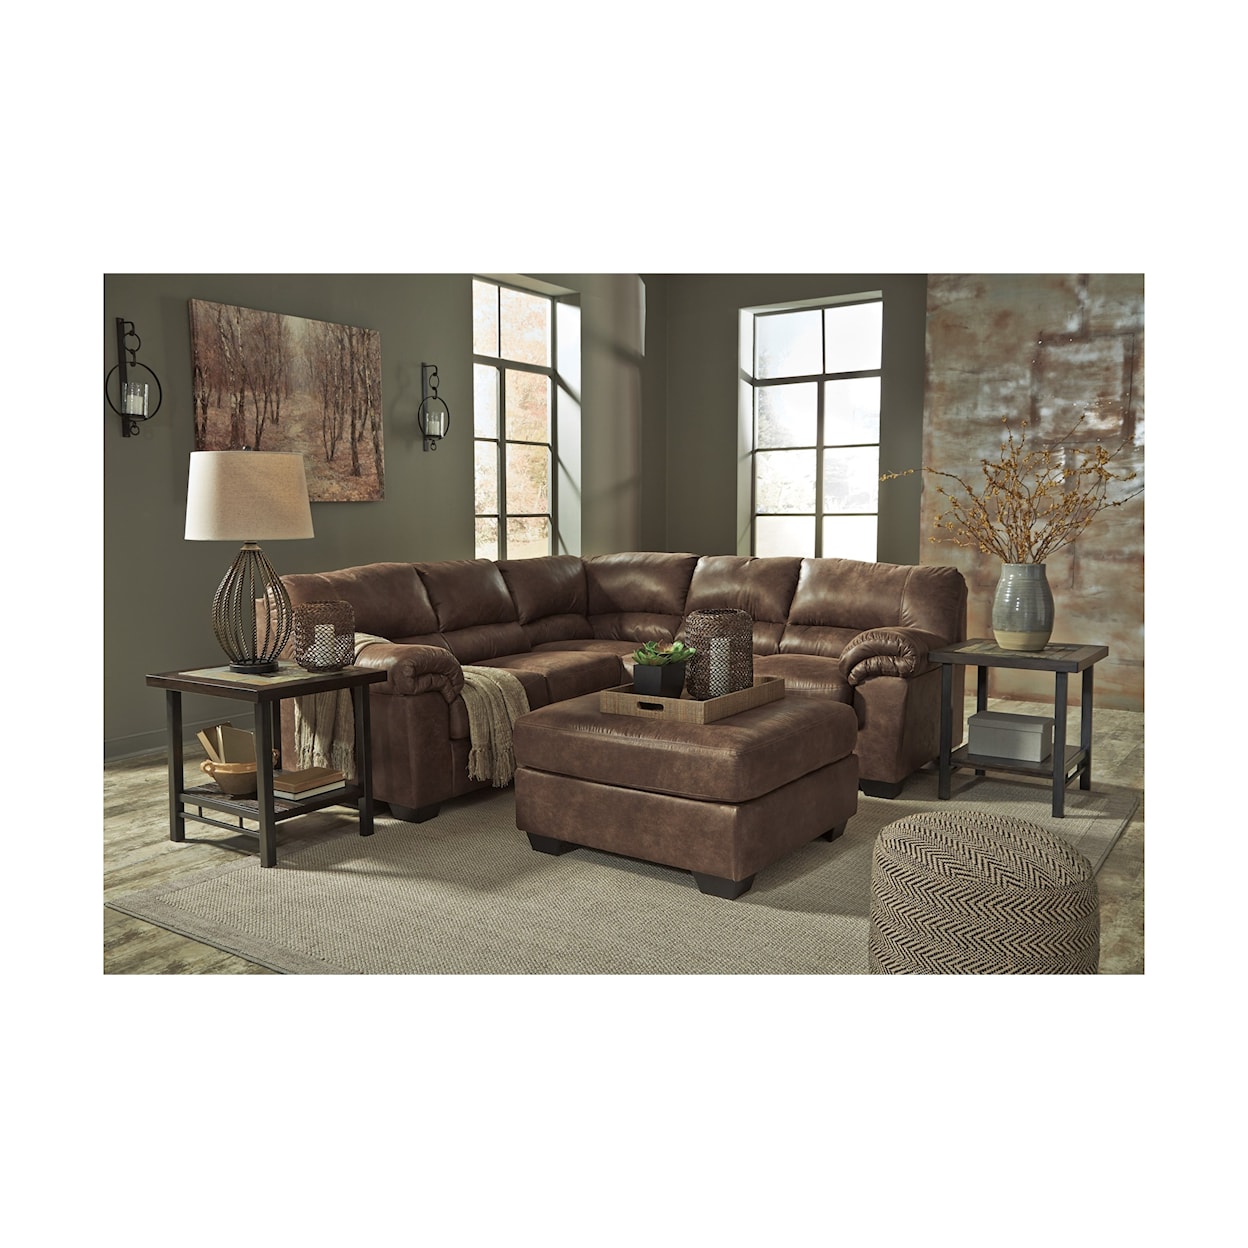 Signature Design by Ashley Furniture Bladen 2-Piece Sectional with Ottoman